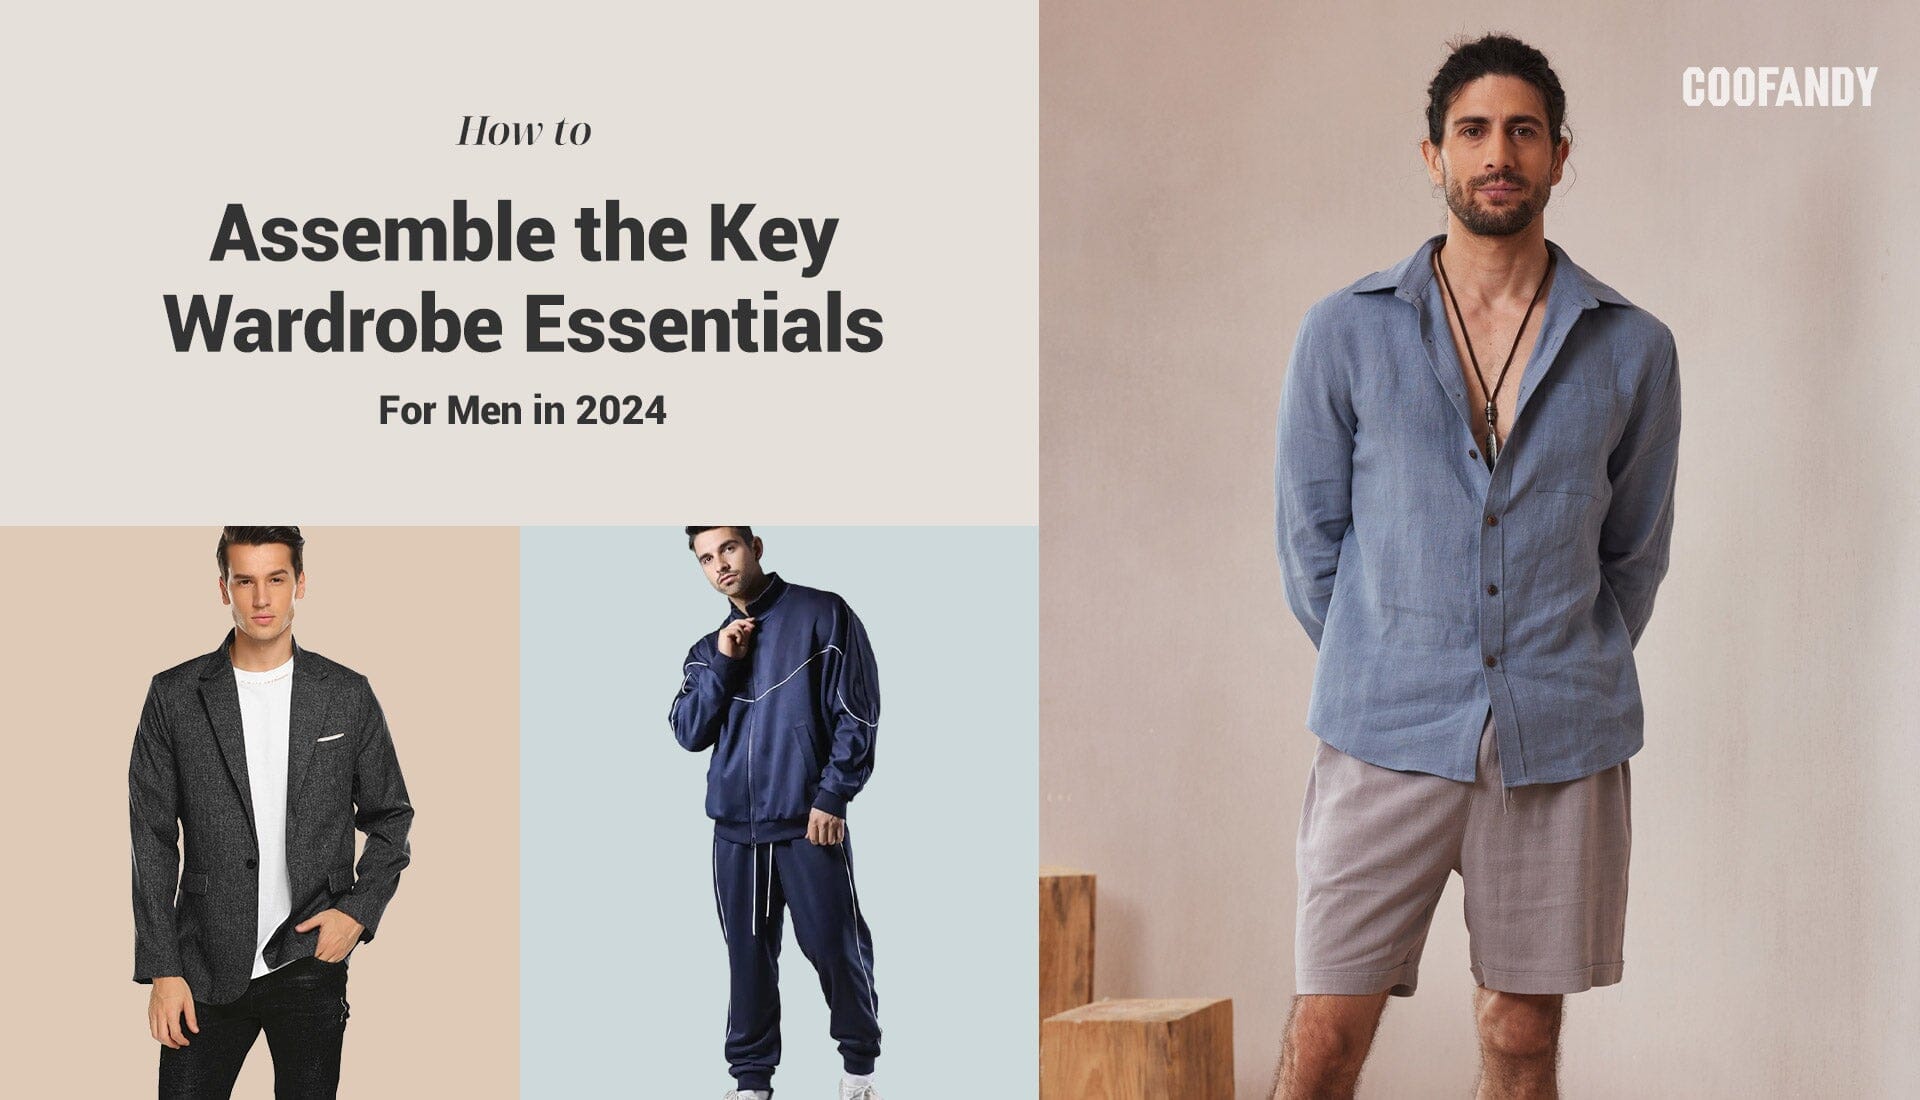 The Men's Style Guide: Capsule Wardrobe Essentials for Casual